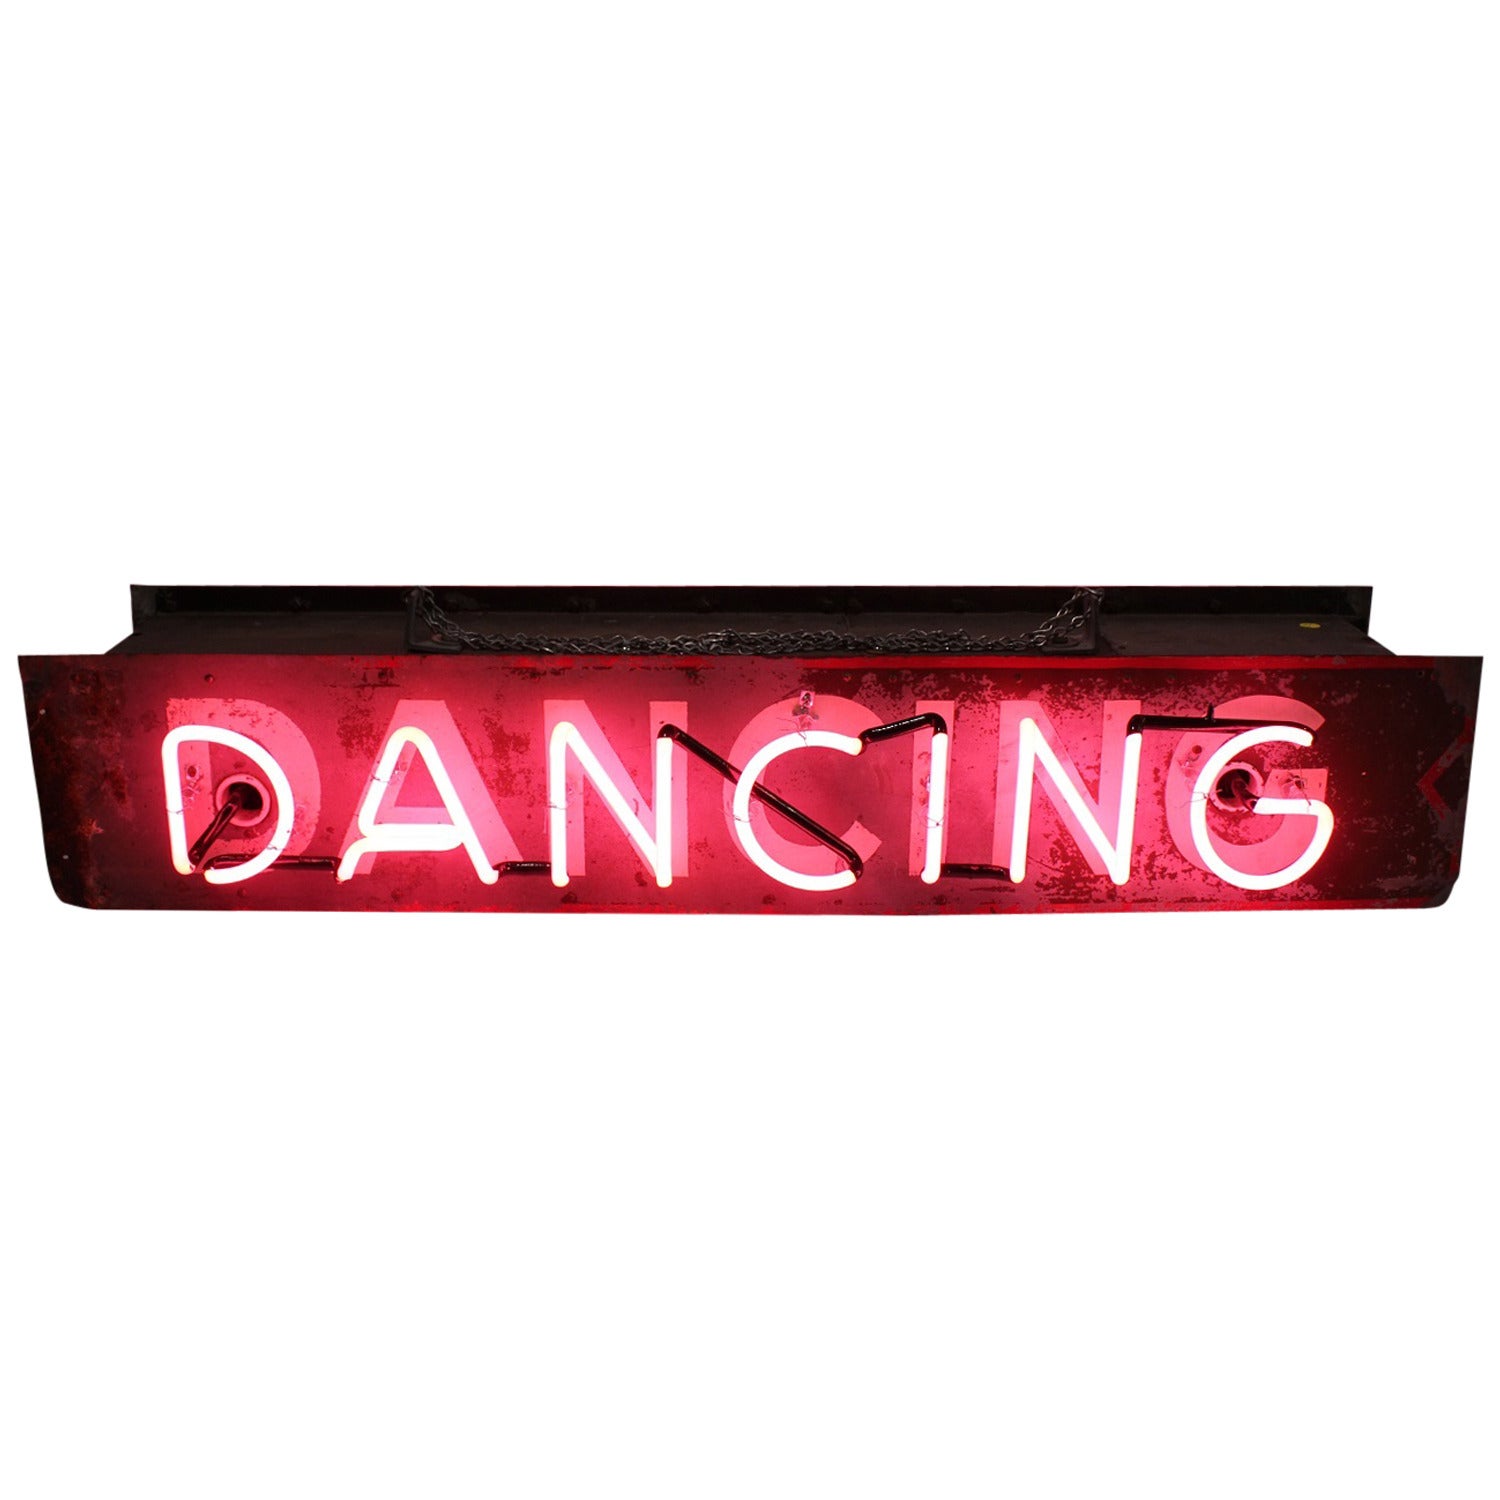 Vintage Double Sided Neon Sign "Dancing"